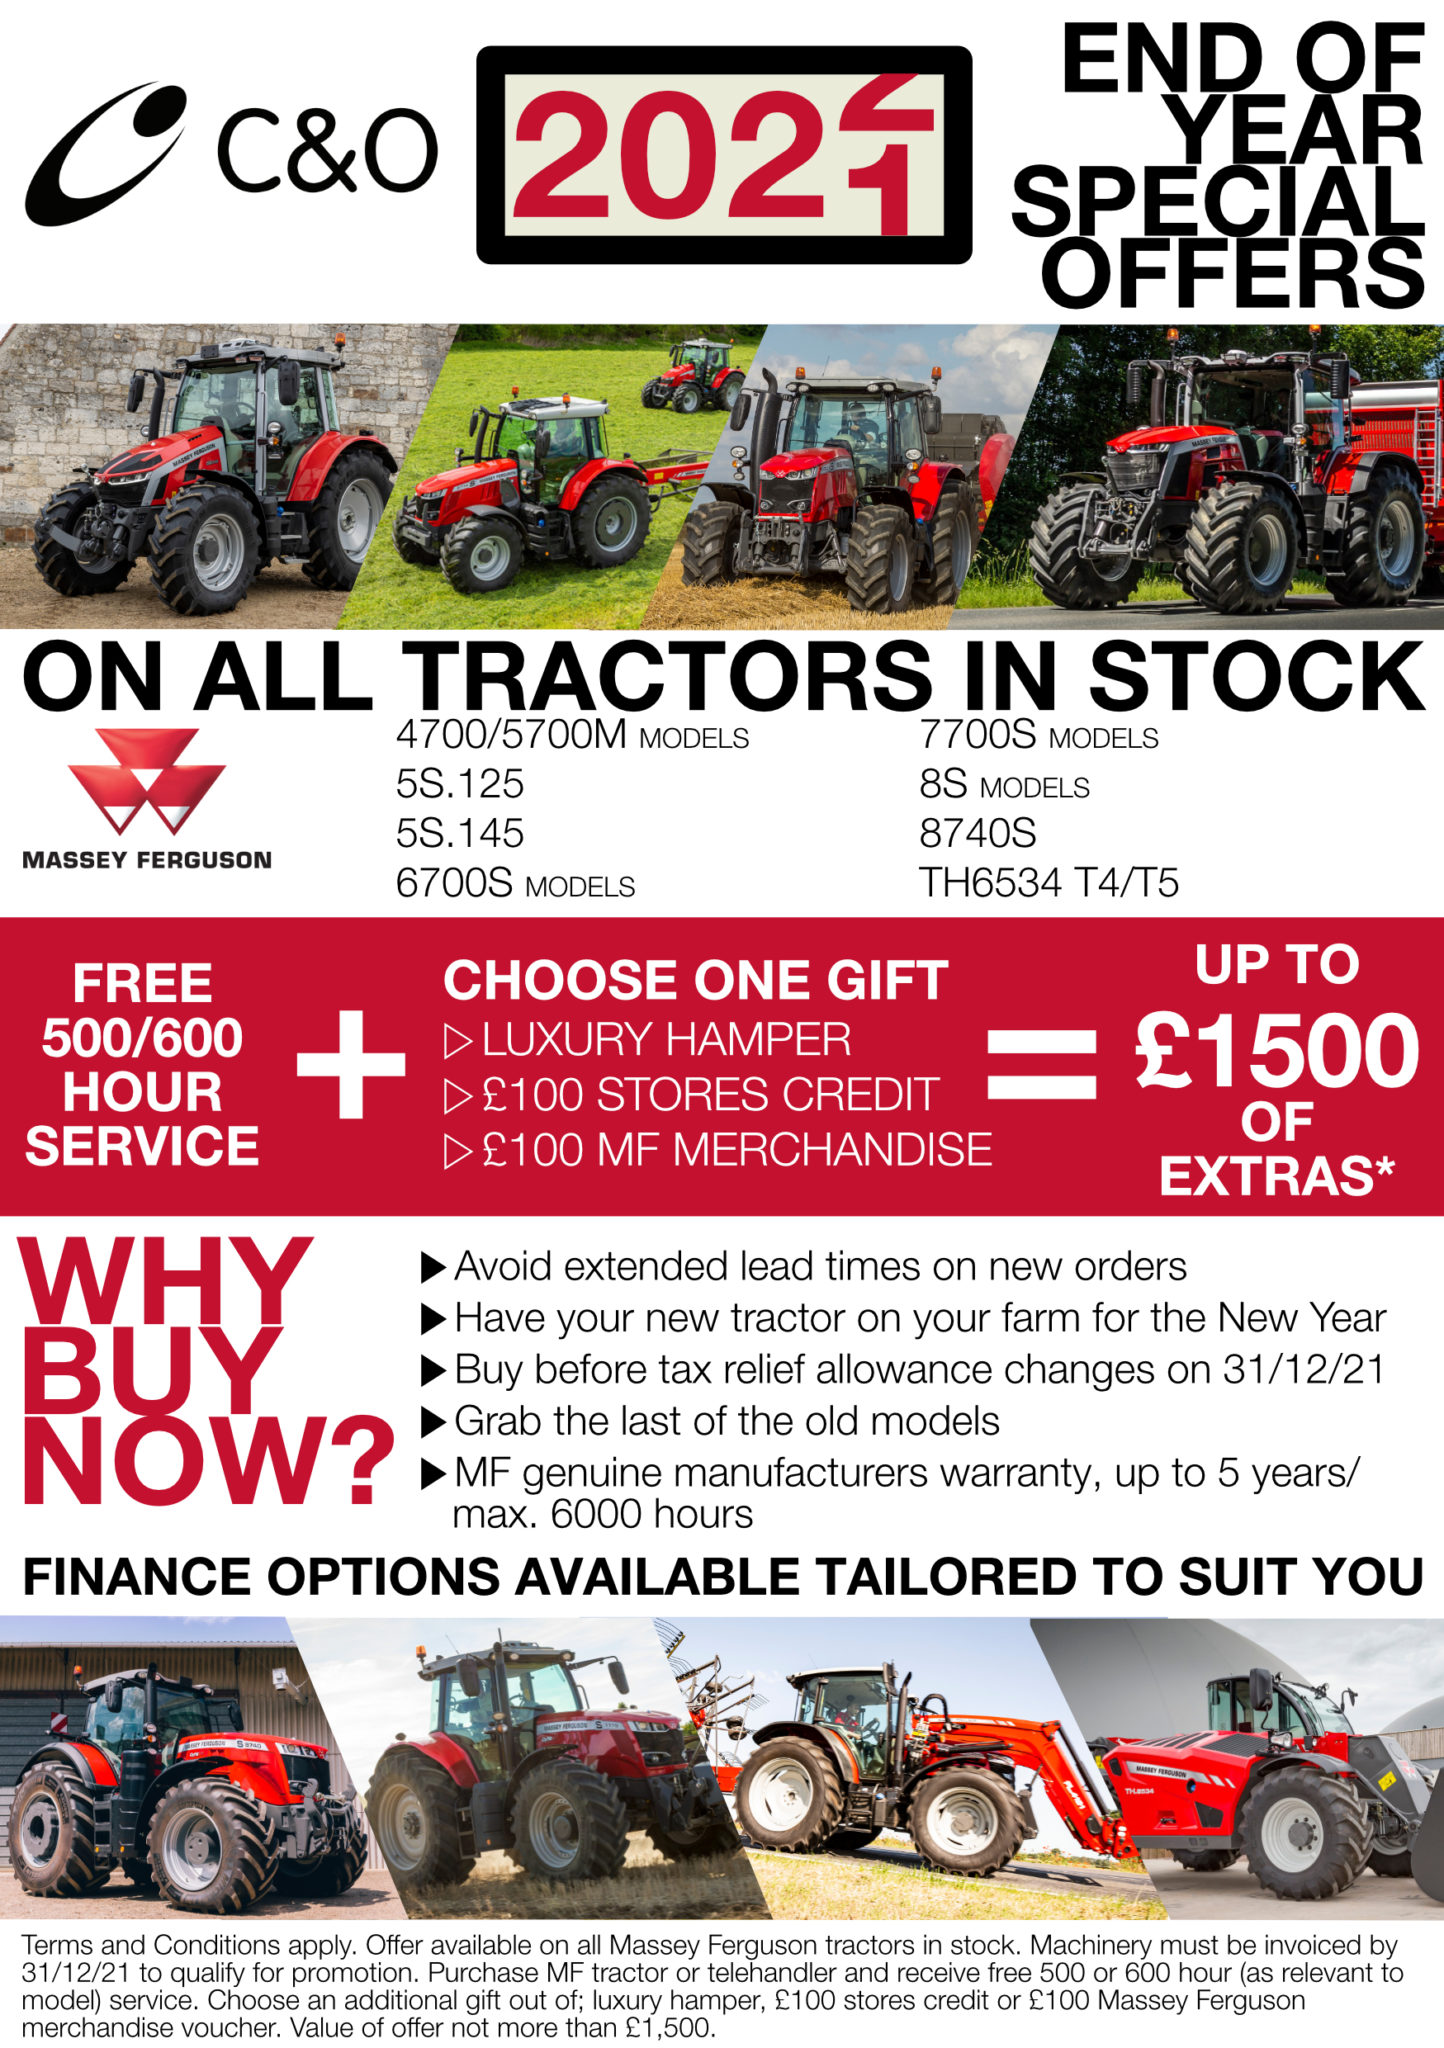 2021 End of Year Special Offers Massey Ferguson